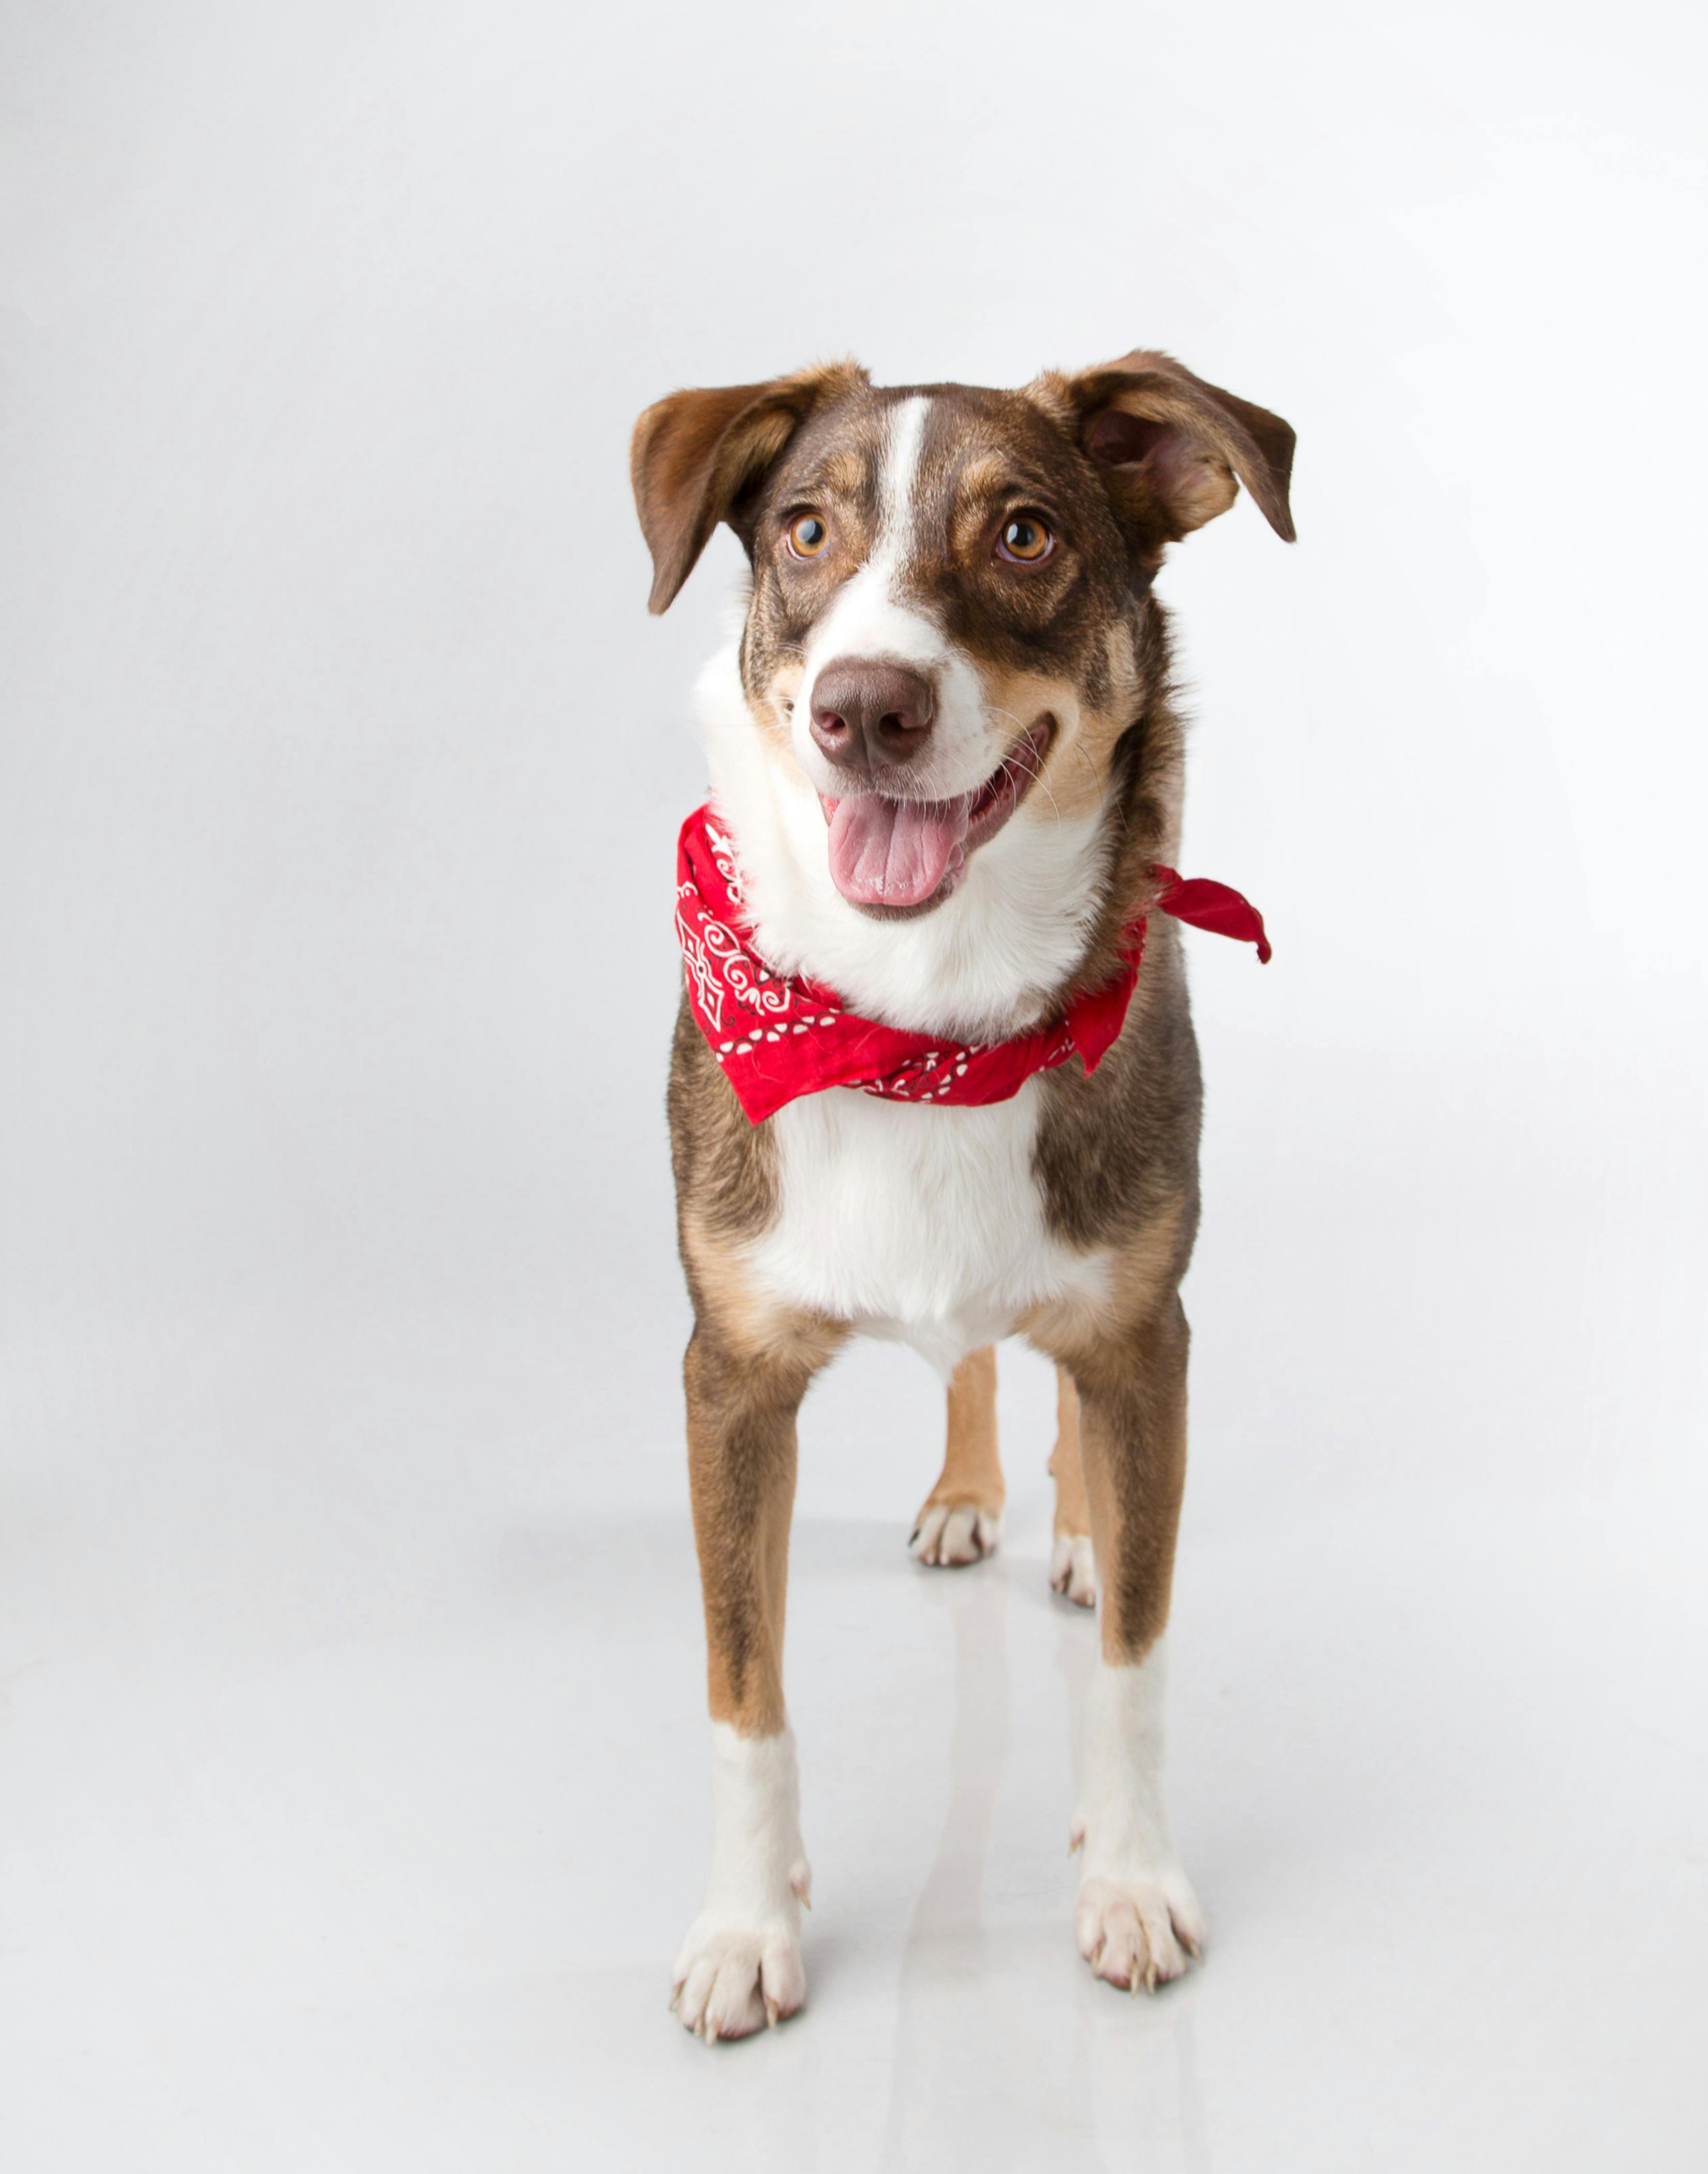 a dog with red bandana on its neck